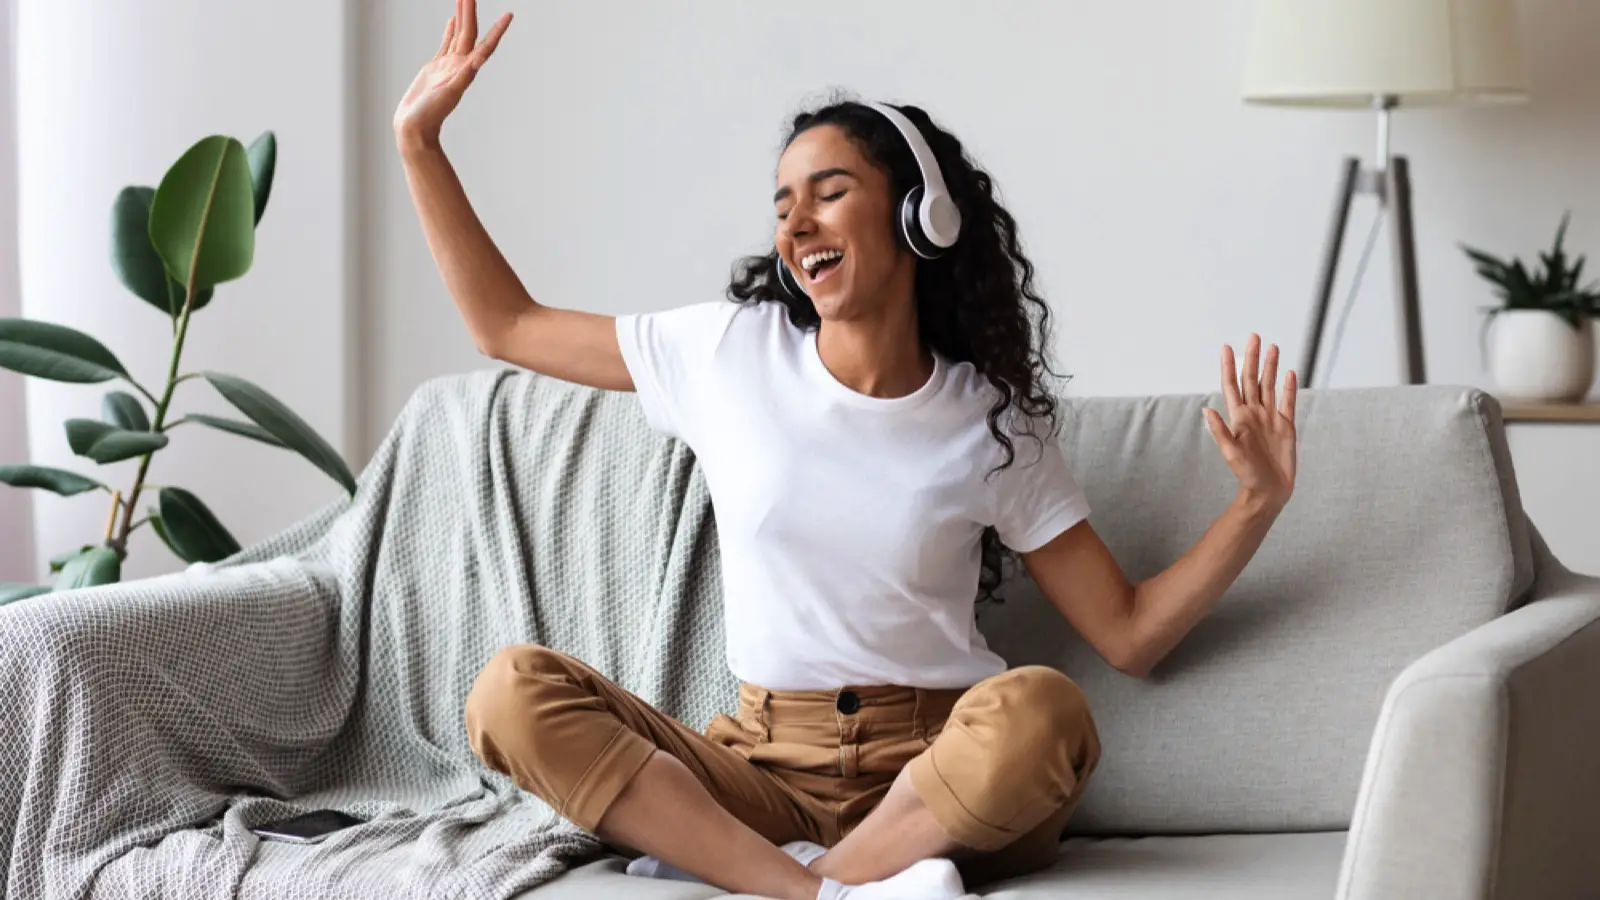 Woman in sofa listening to music and dancing